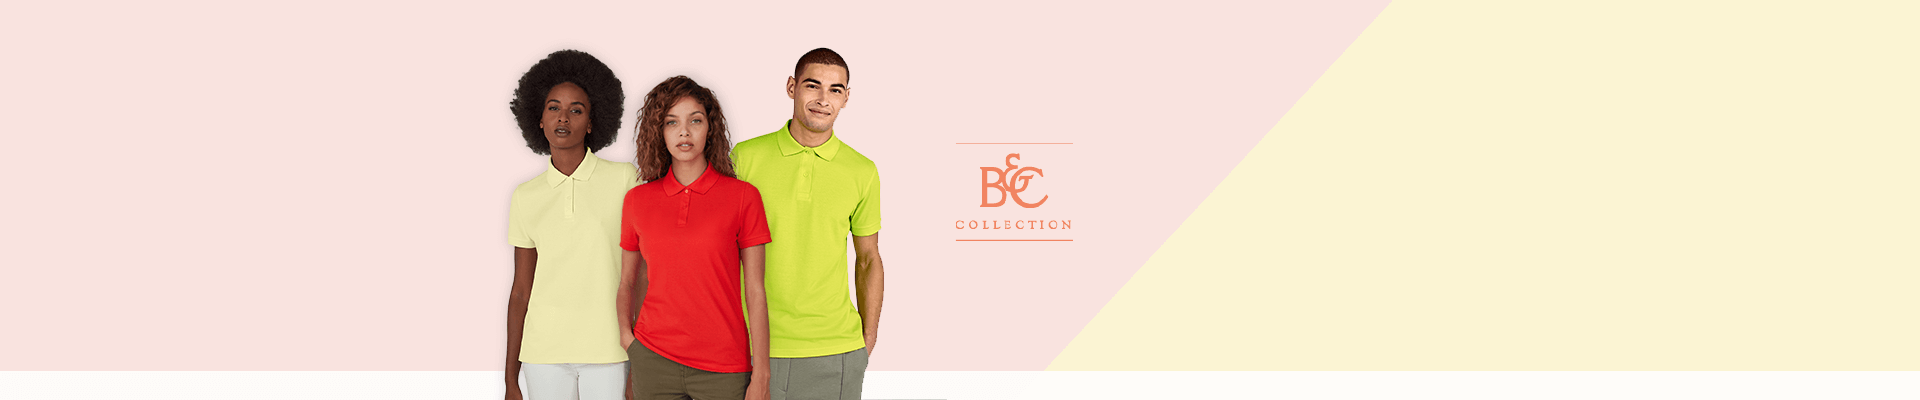 Colourful new Polo articles from B&C.
Order your sample set now at a special price.